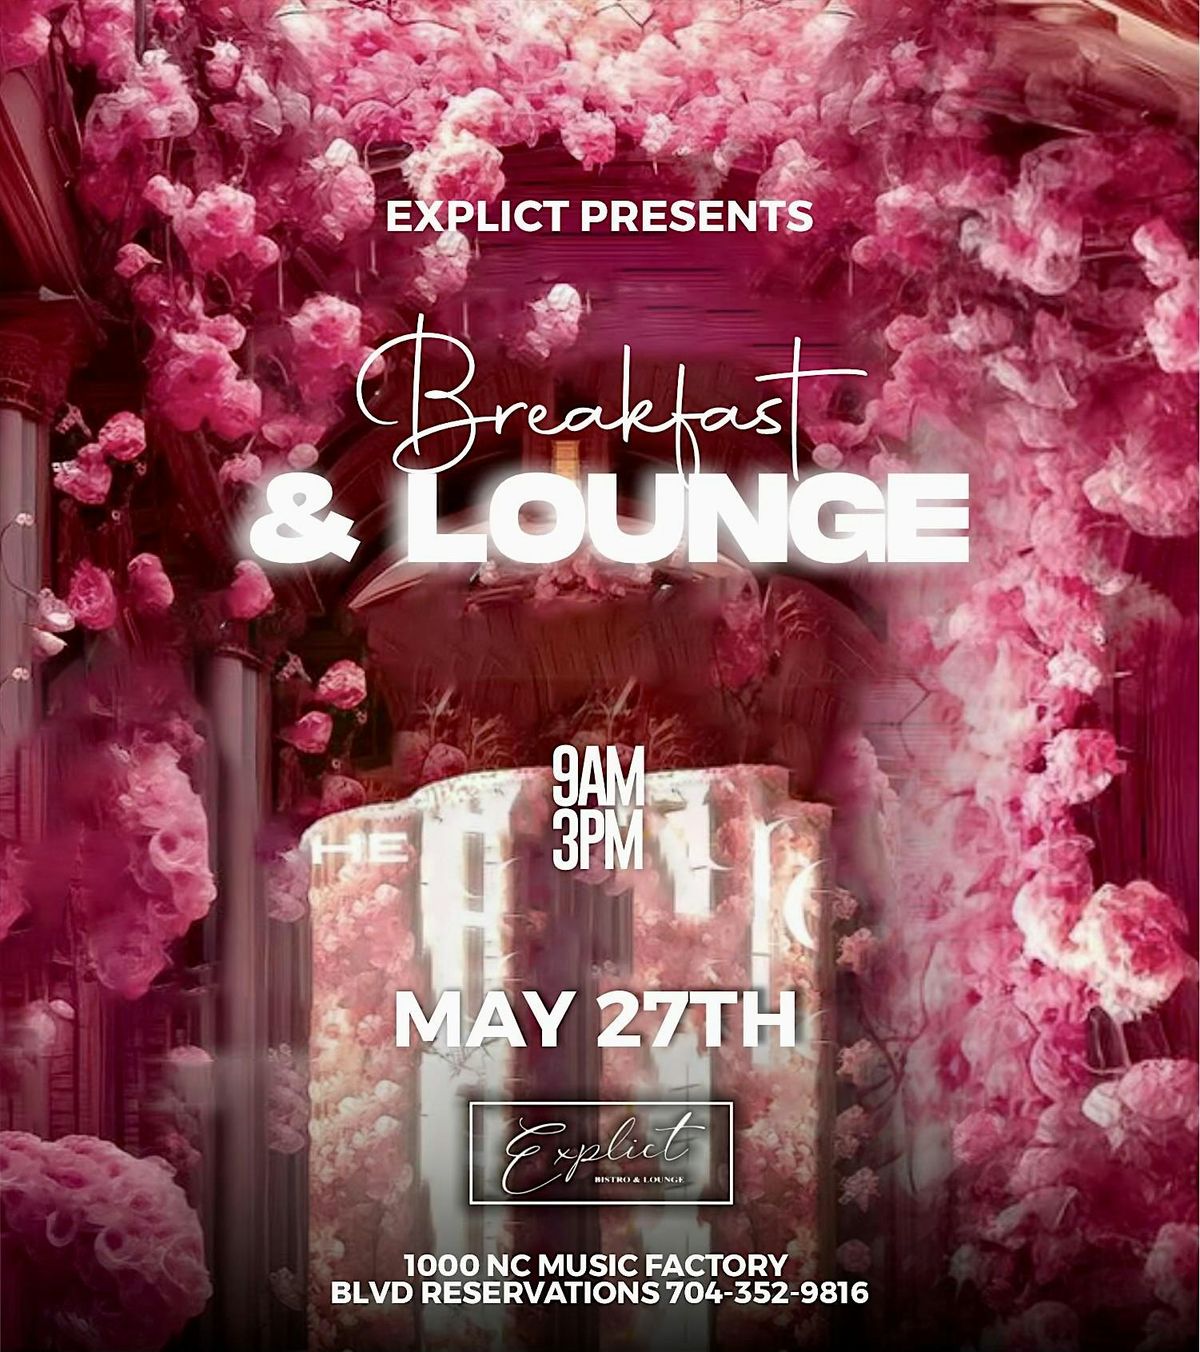 BREAKFAST & LOUNGE AT THE FACTORY!